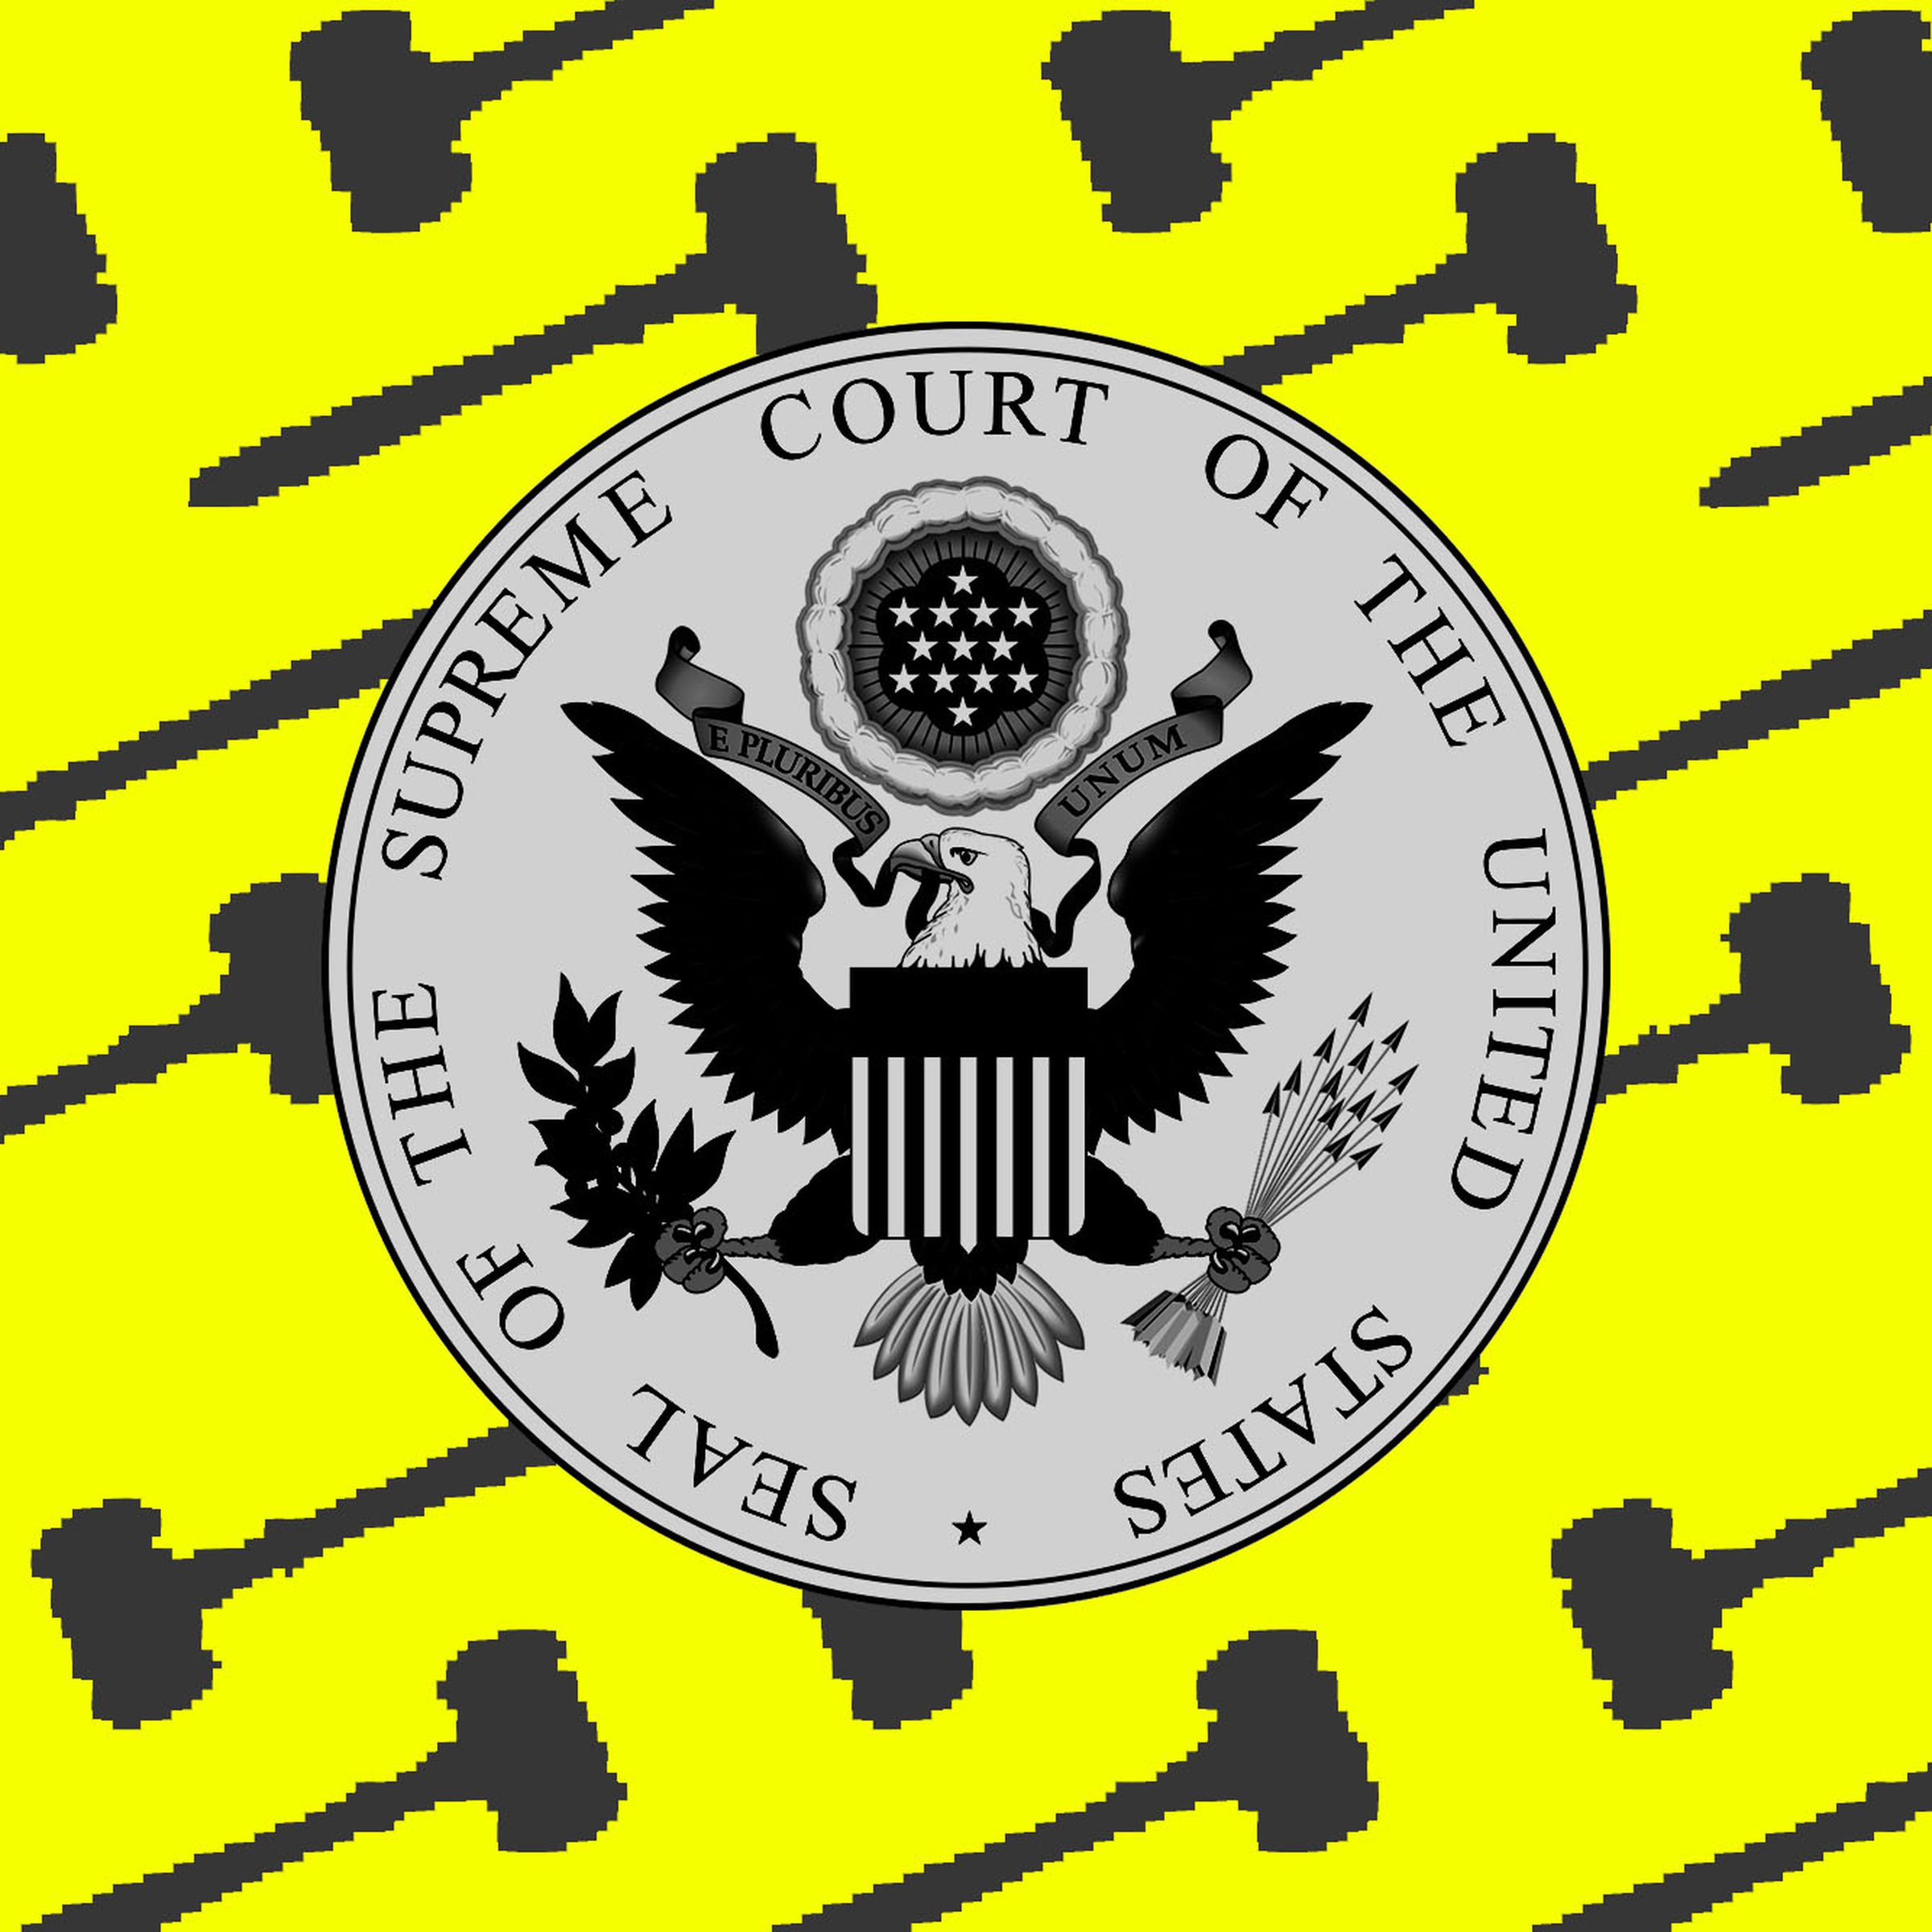 Photo illustration of the seal of the Supreme Court building with gavels behind.